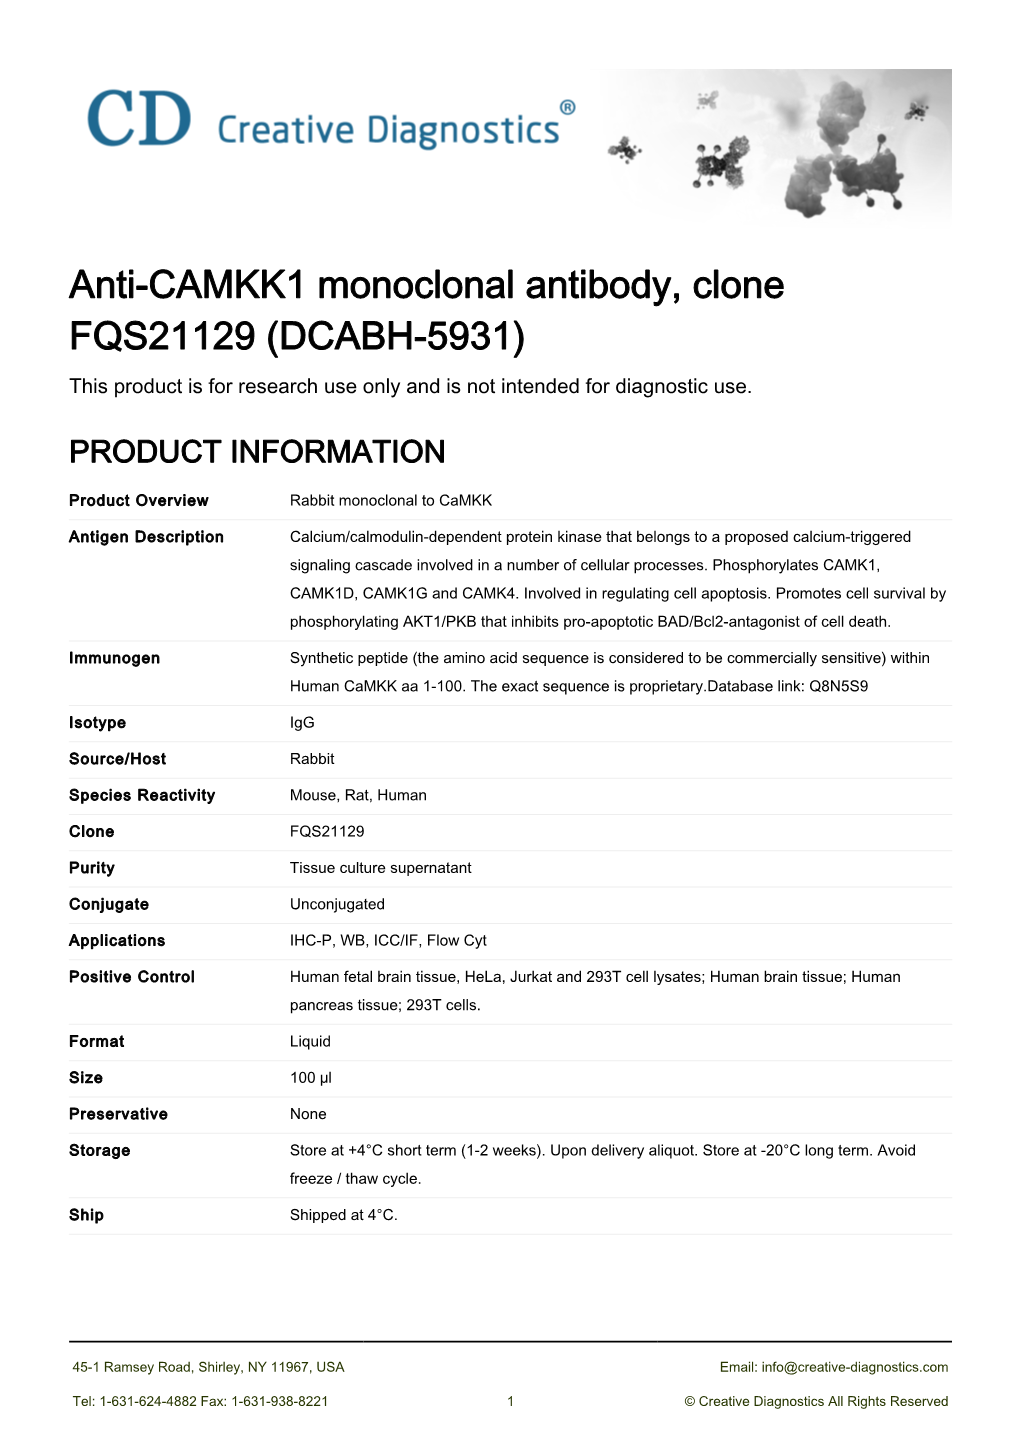 Anti-CAMKK1 Monoclonal Antibody, Clone FQS21129 (DCABH-5931) This Product Is for Research Use Only and Is Not Intended for Diagnostic Use